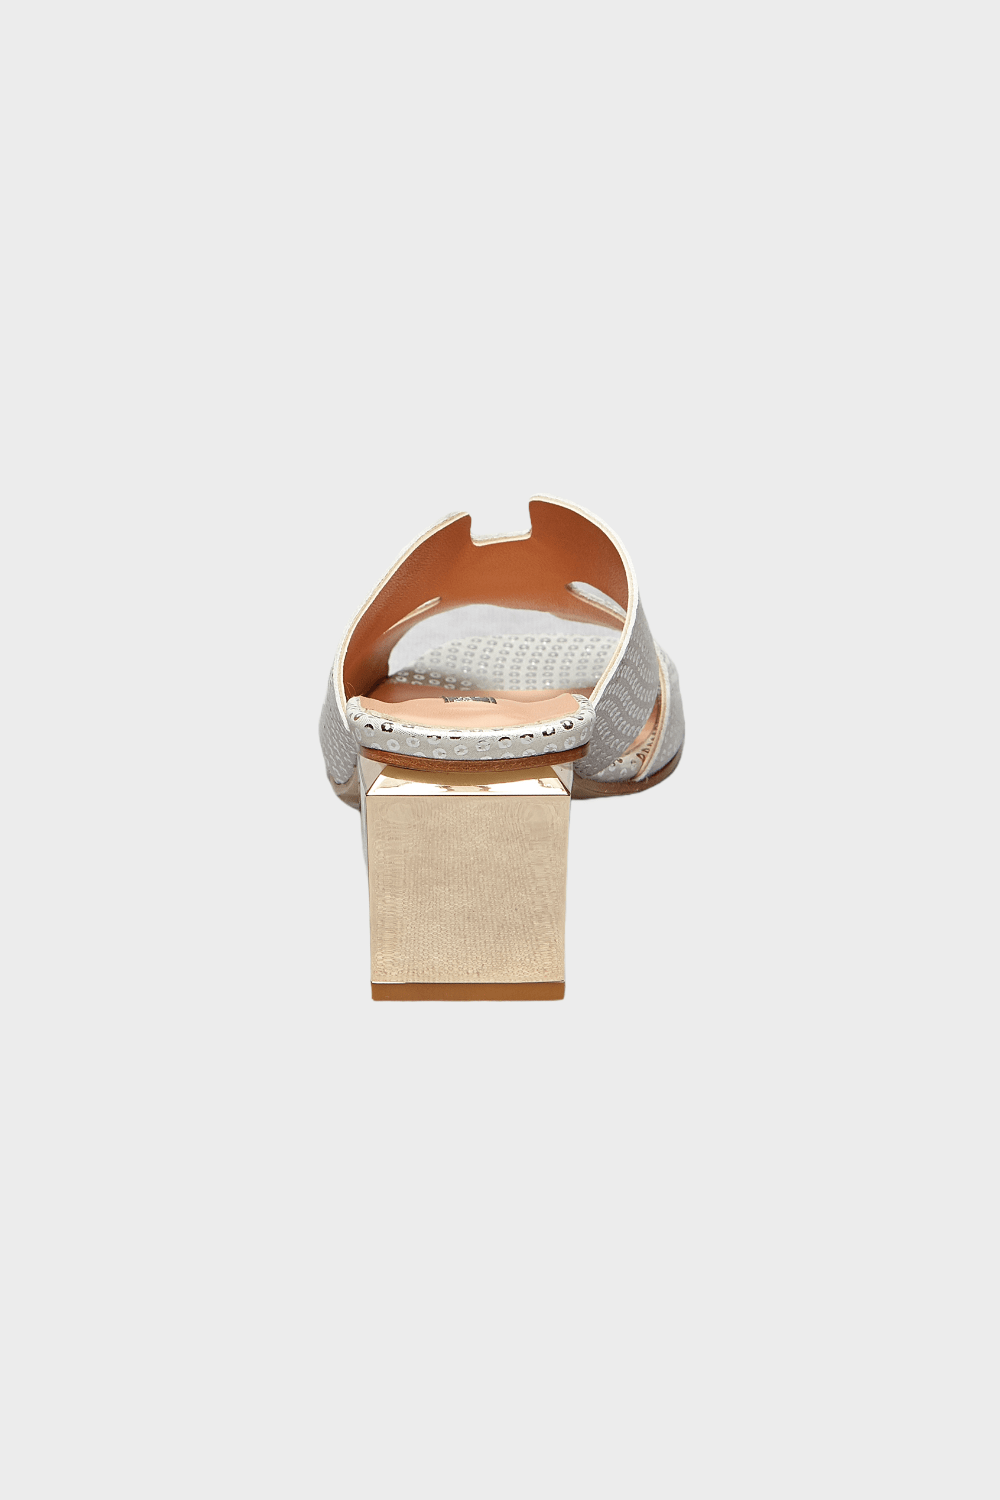 Danilo di Lea by Roselina SHOES Janice Silver Leather Mule Sandals